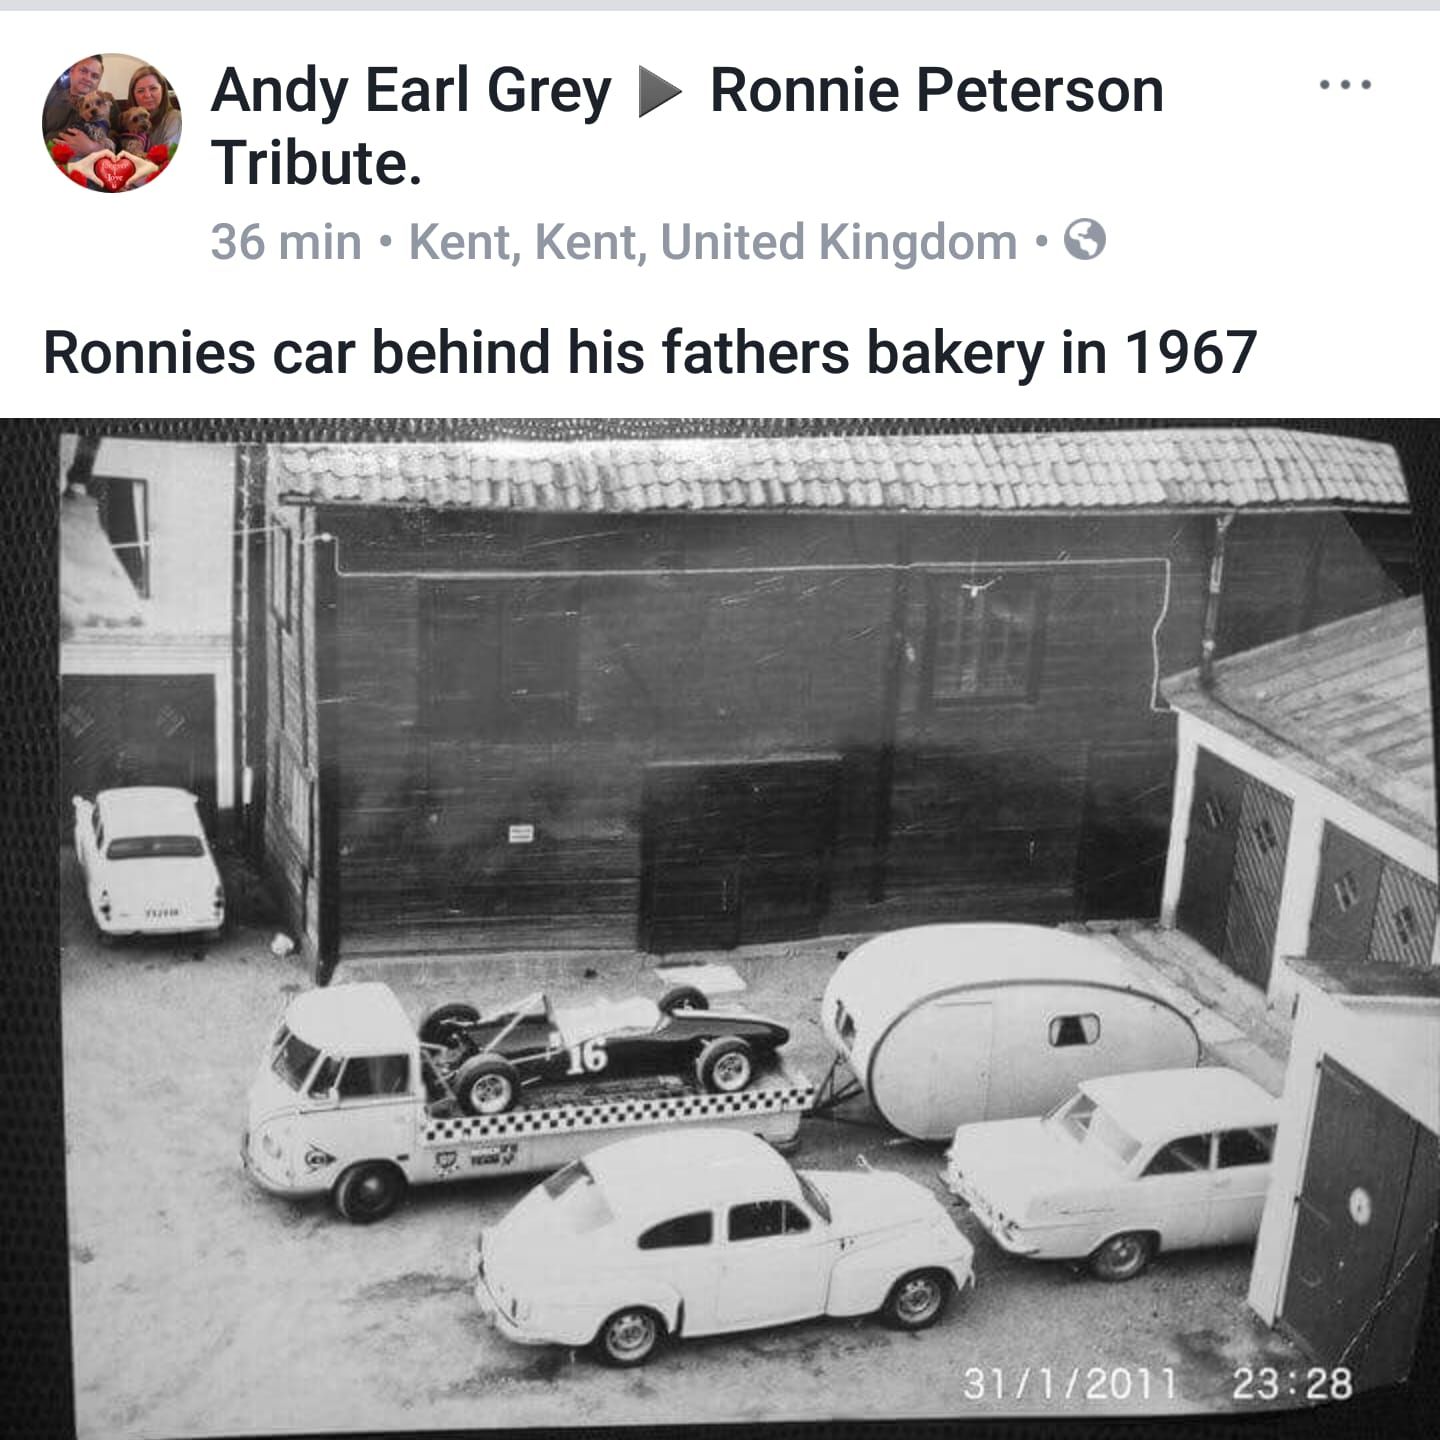 Ronnie’s car behind his father’s bakery in 1967.